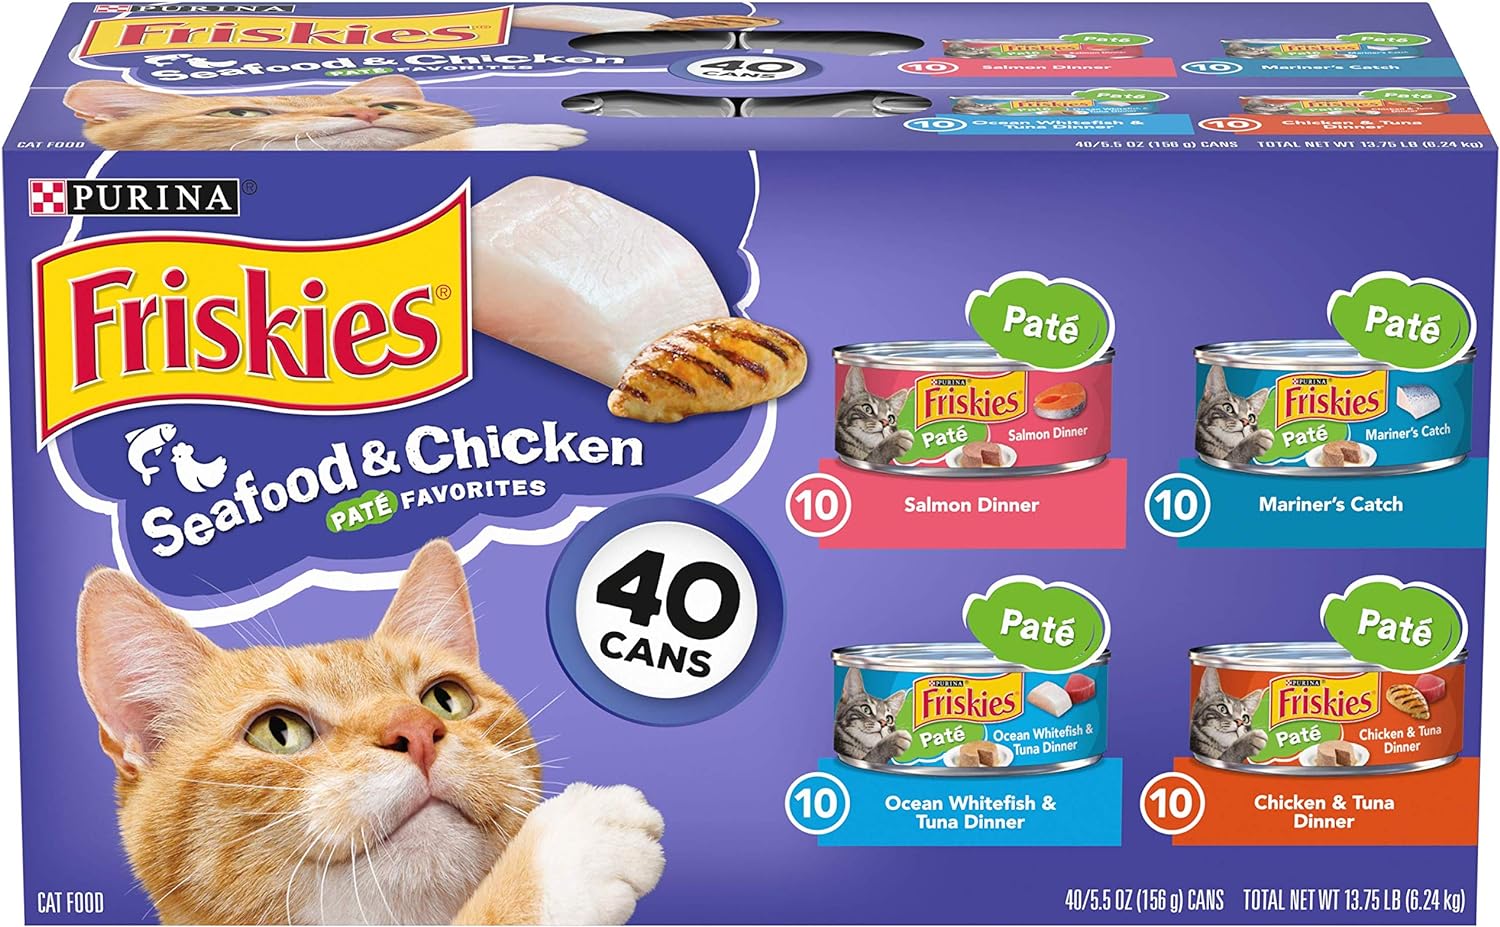 Purina Friskies Wet Cat Food: 40-Count 5.5-Oz Variety Pack (Seafood & Chicken) $22.05 w/ S&S, 24-Count 5.5-Oz (Country Style Chicken) $12.45 & More + FS w/ Prime or on $35+